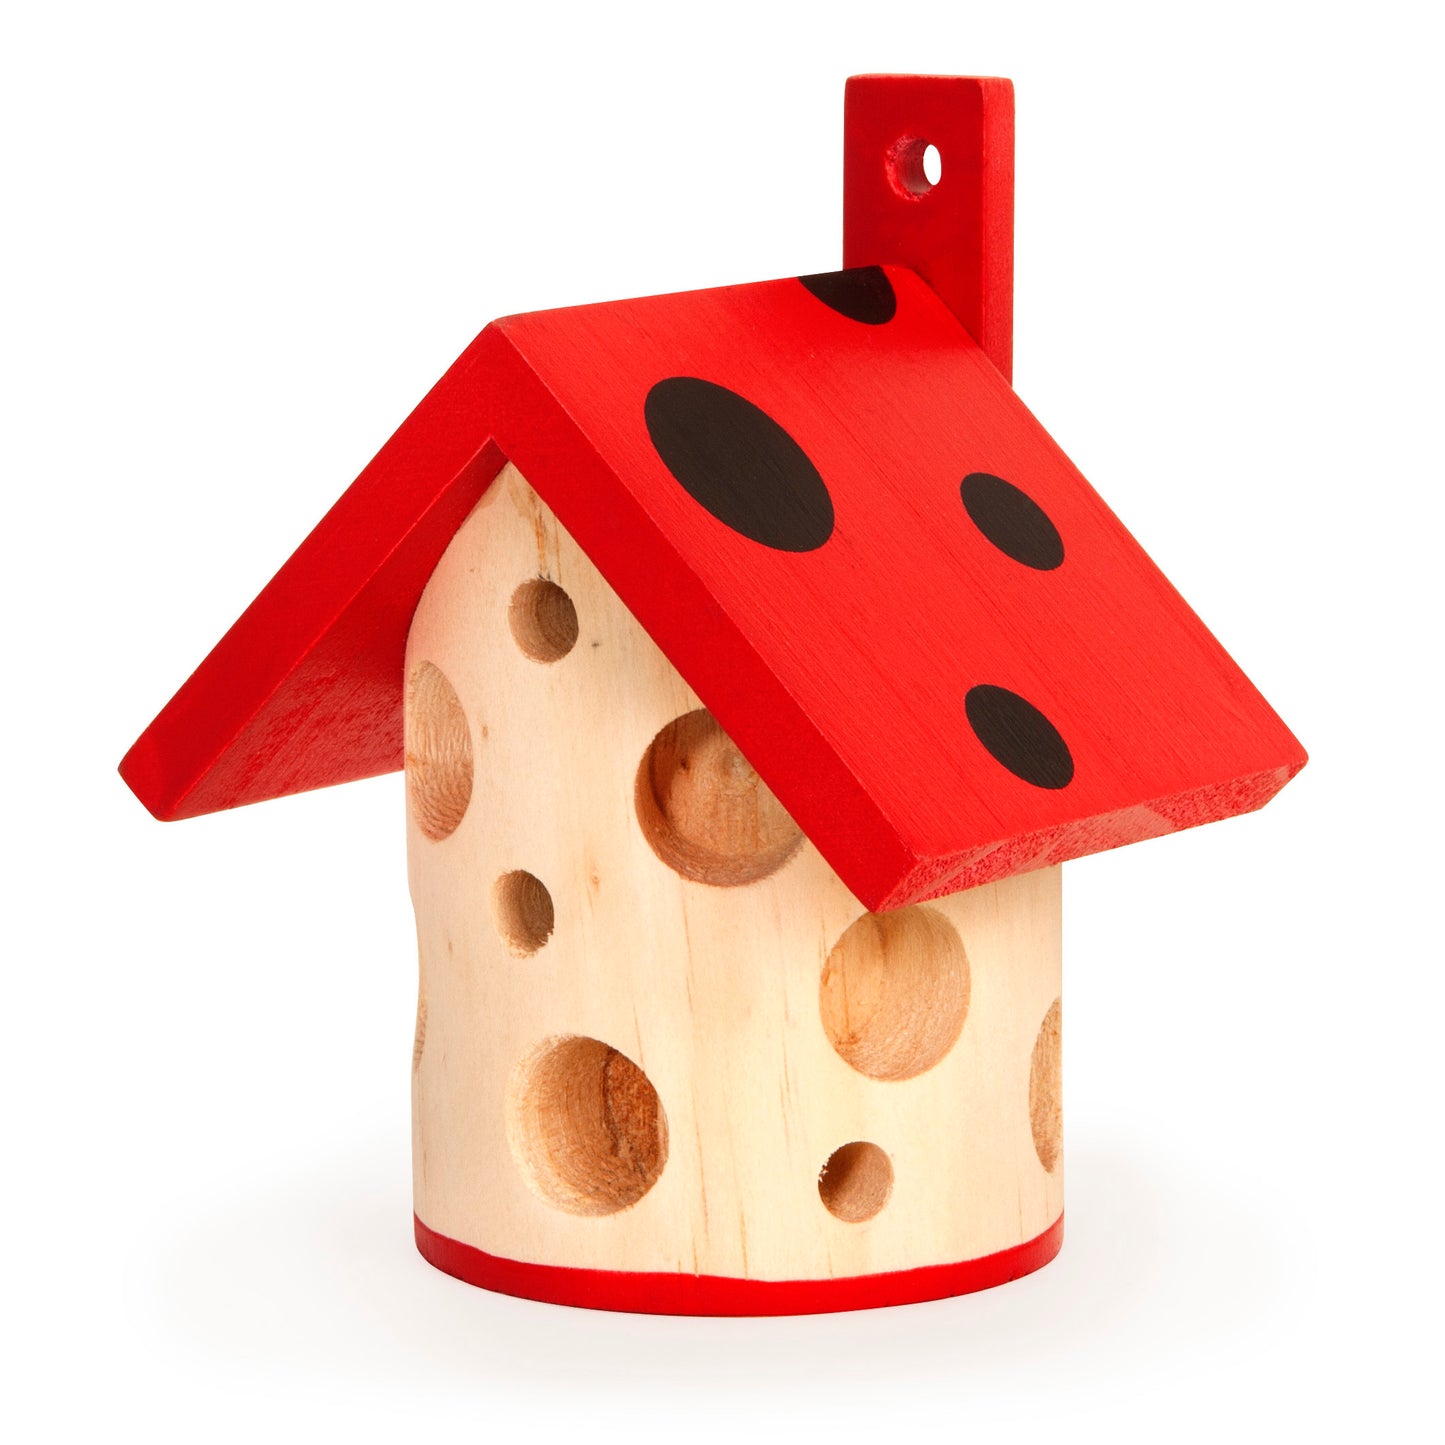 Pinewood ladybird house with a red spotty roof